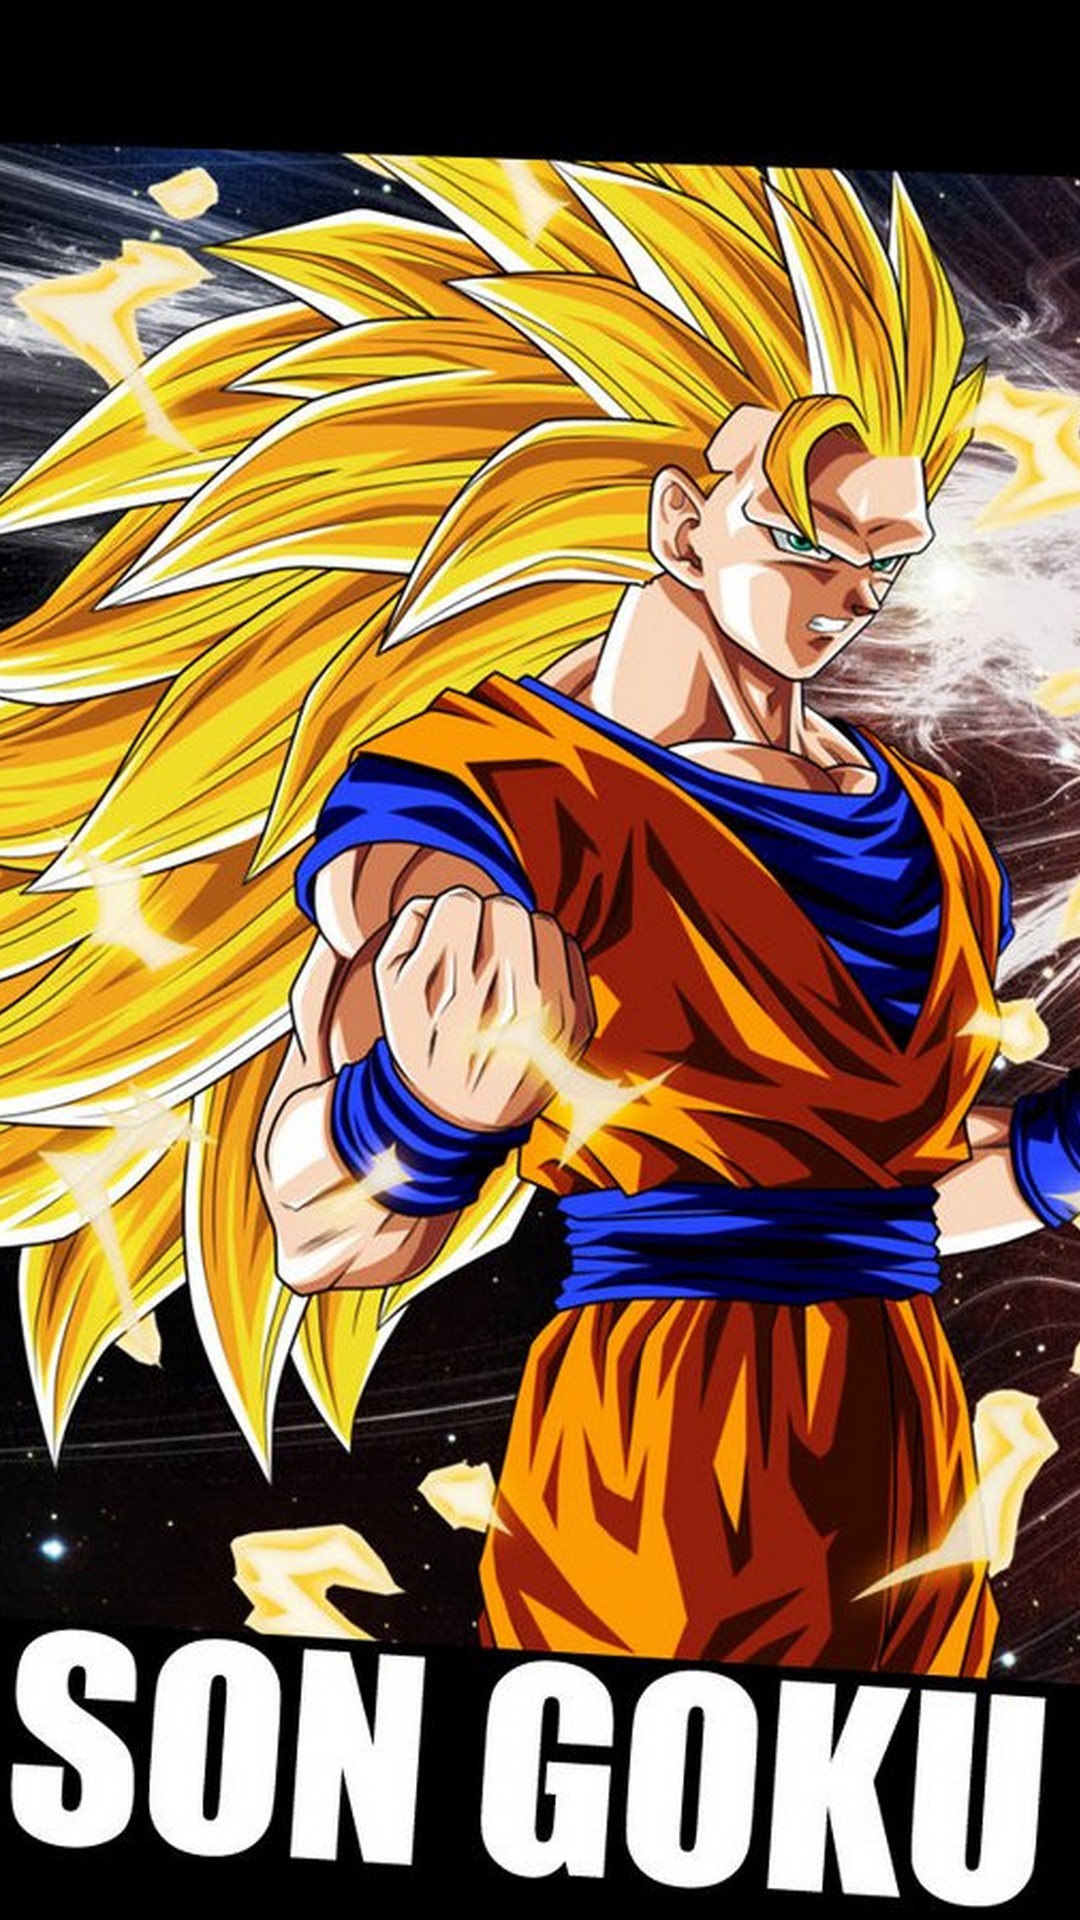 Goku SSJ3 iPhone Wallpaper with image resolution 1080x1920 pixel. You can make this wallpaper for your iPhone 5, 6, 7, 8, X backgrounds, Mobile Screensaver, or iPad Lock Screen